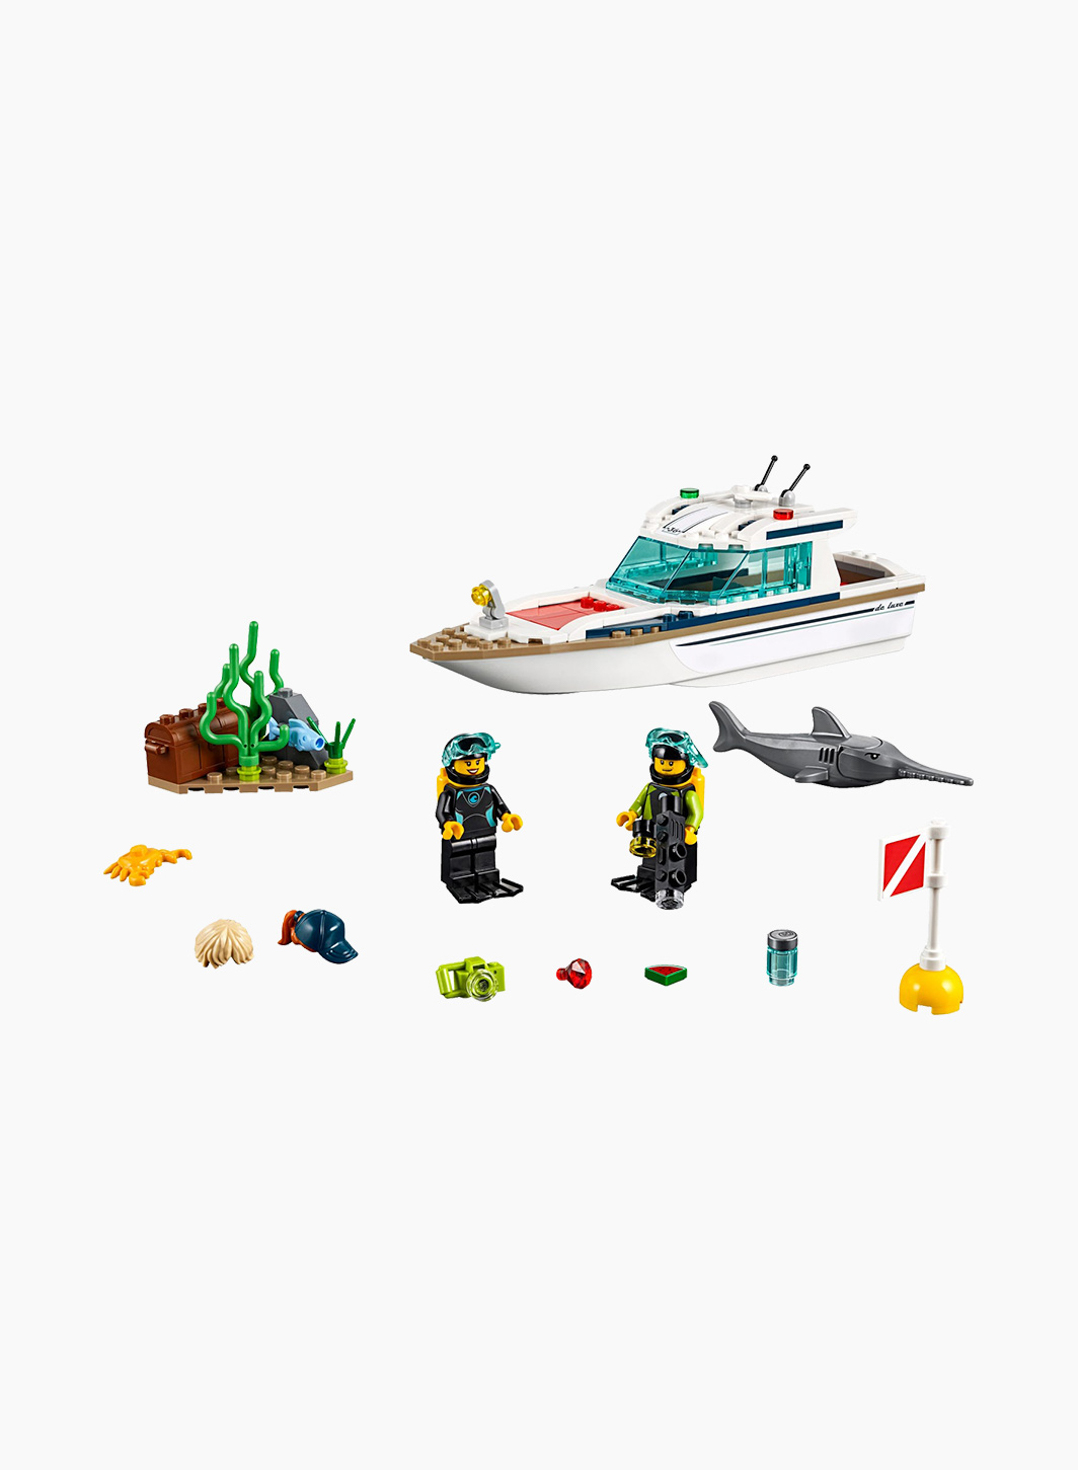 Lego City Constructor Diving Yacht